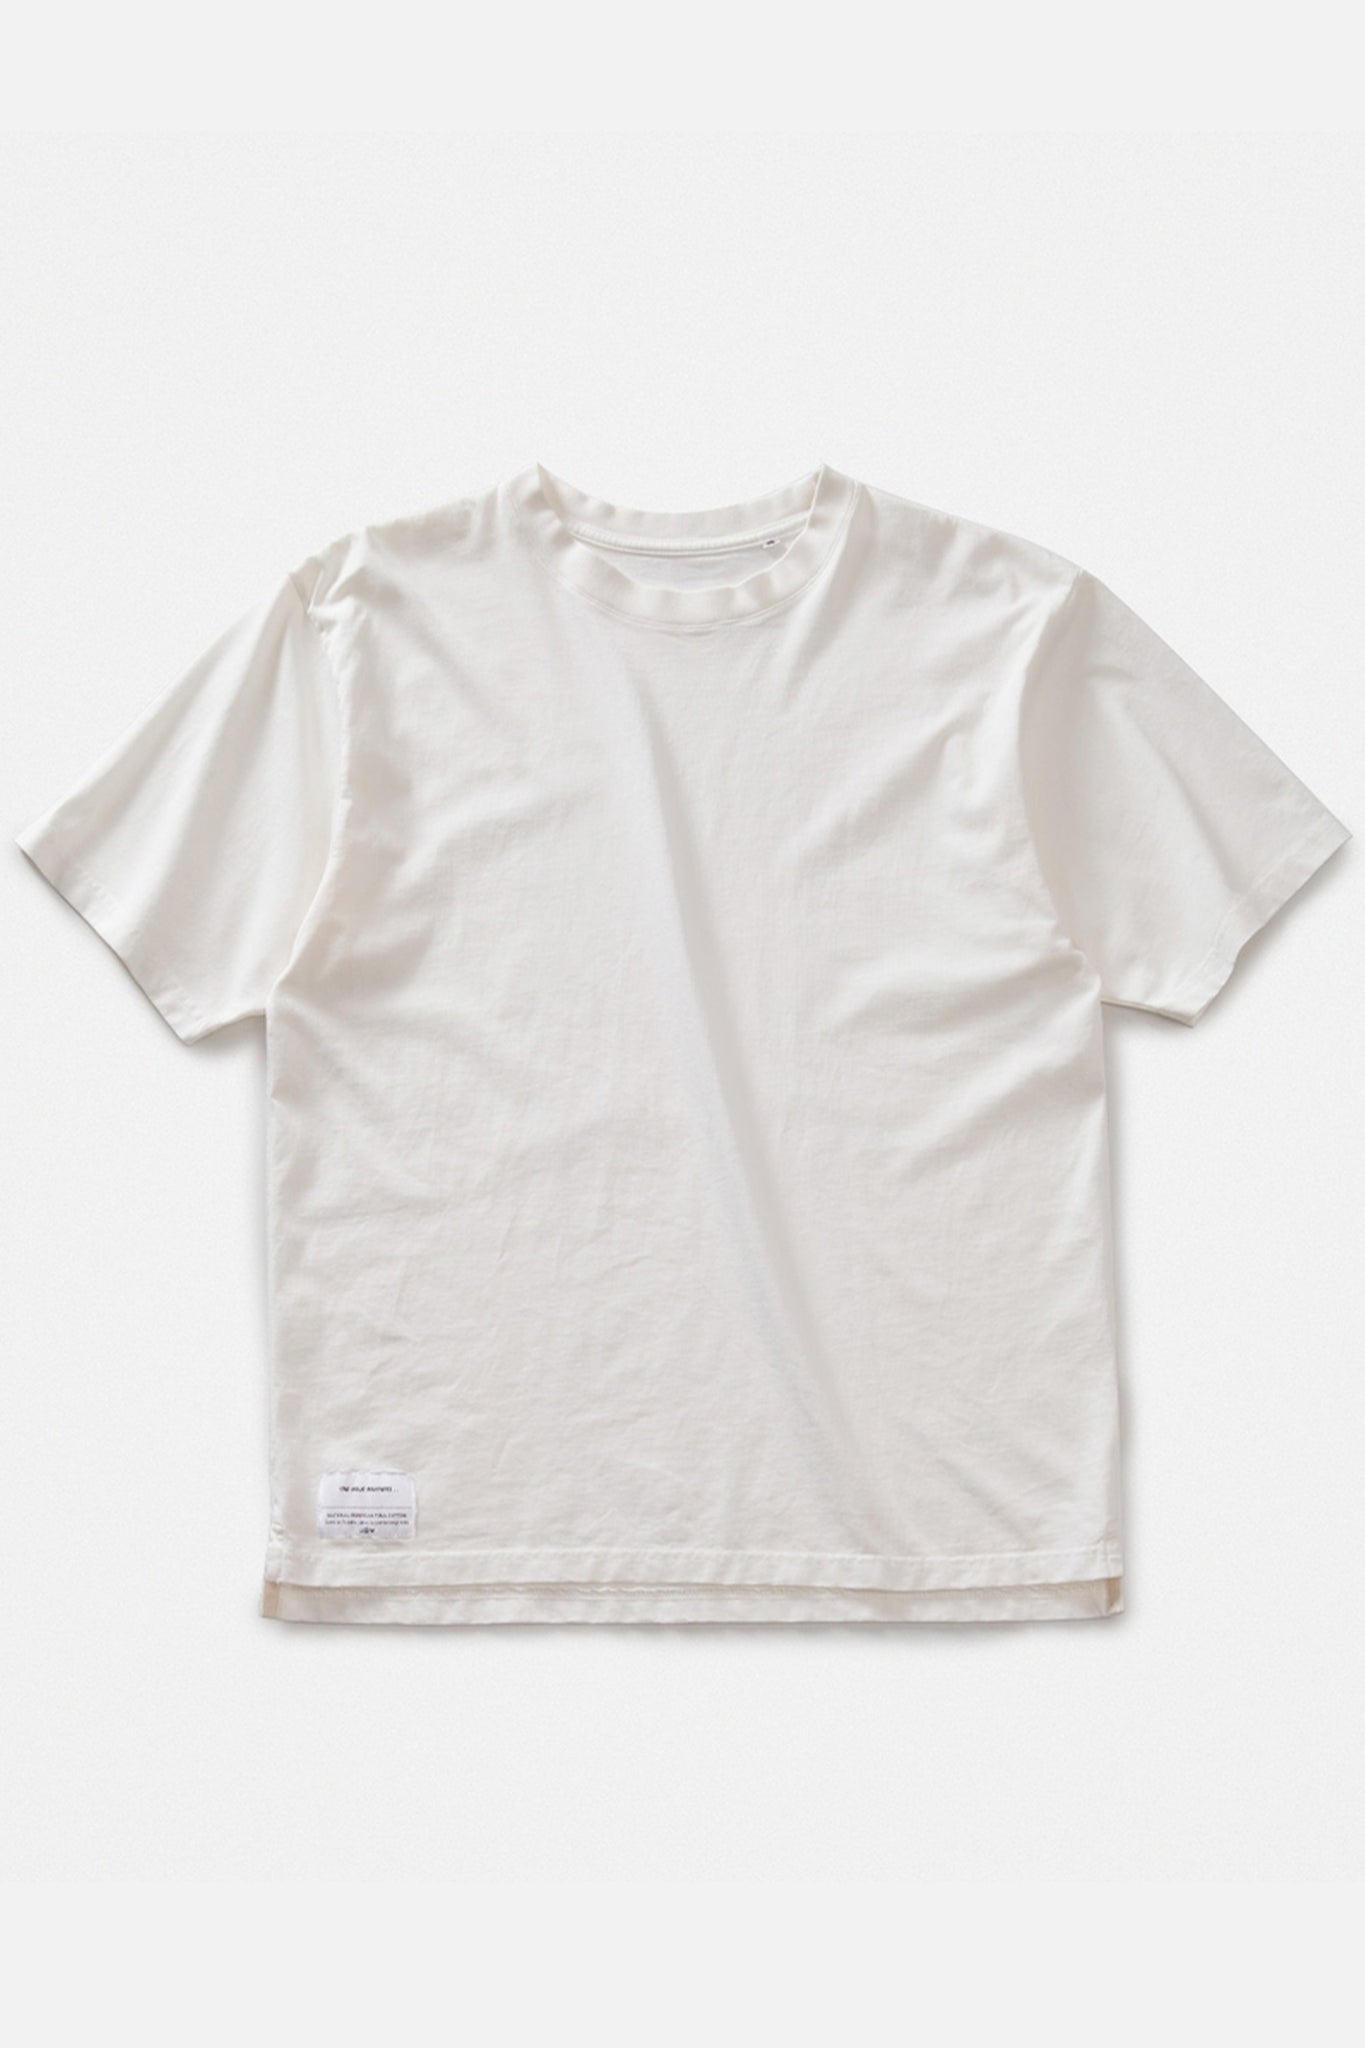 THE INOUE BROTHERS... "SINGLE JERSEY BOX T-SHIRT/WHITE"